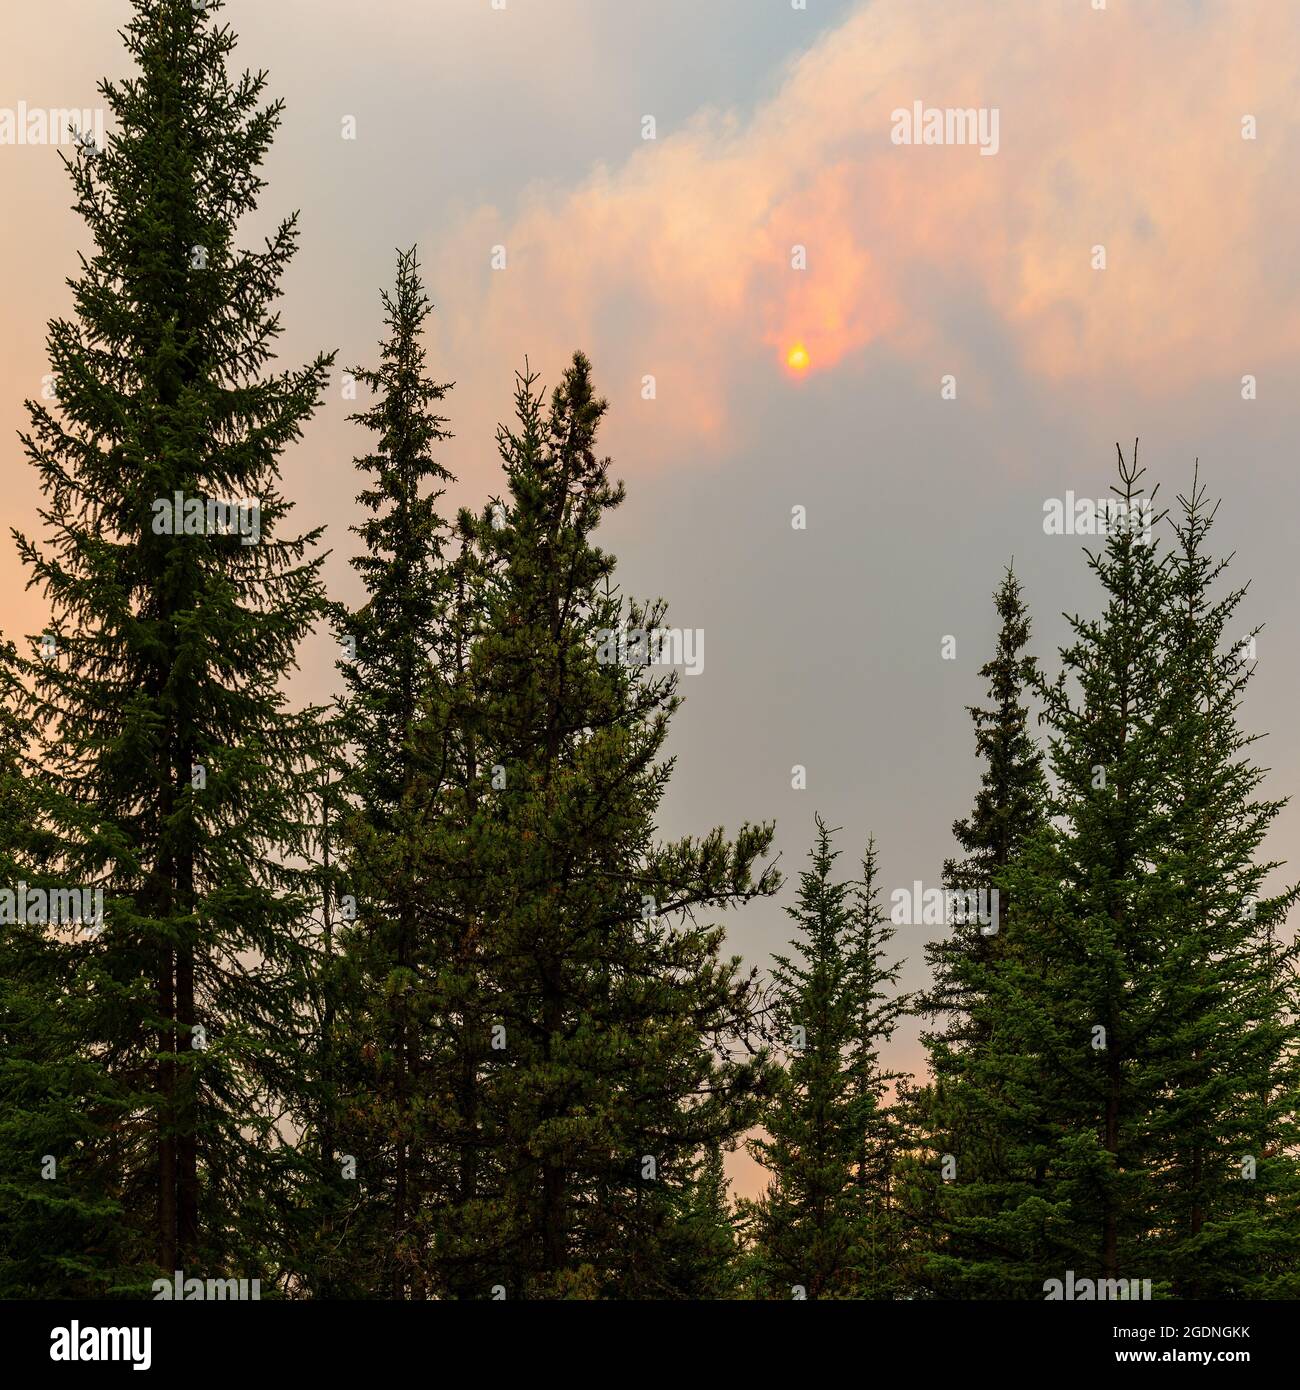 Forest fire inferno in the pine tree forests of British Columbia, Canada. Wildfires and climate change concept. Stock Photo